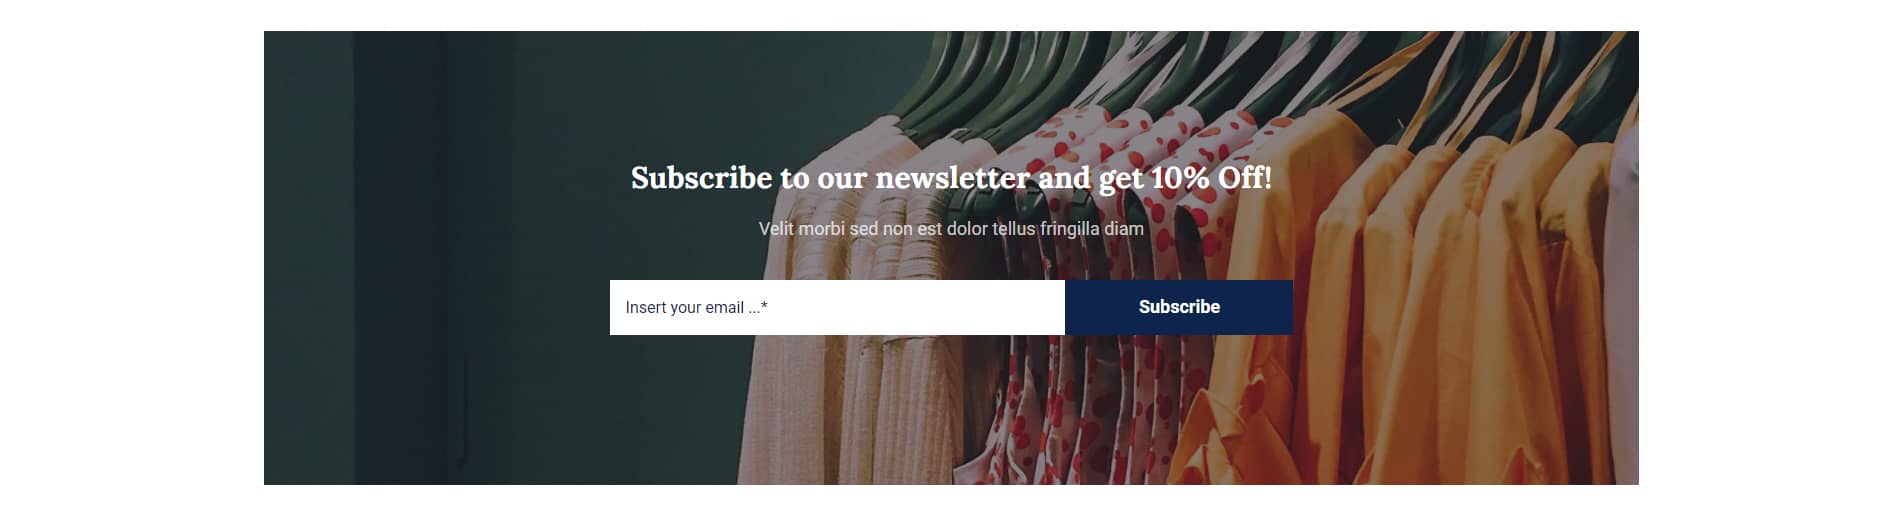 Avada Retail Newsletter Subscription Form